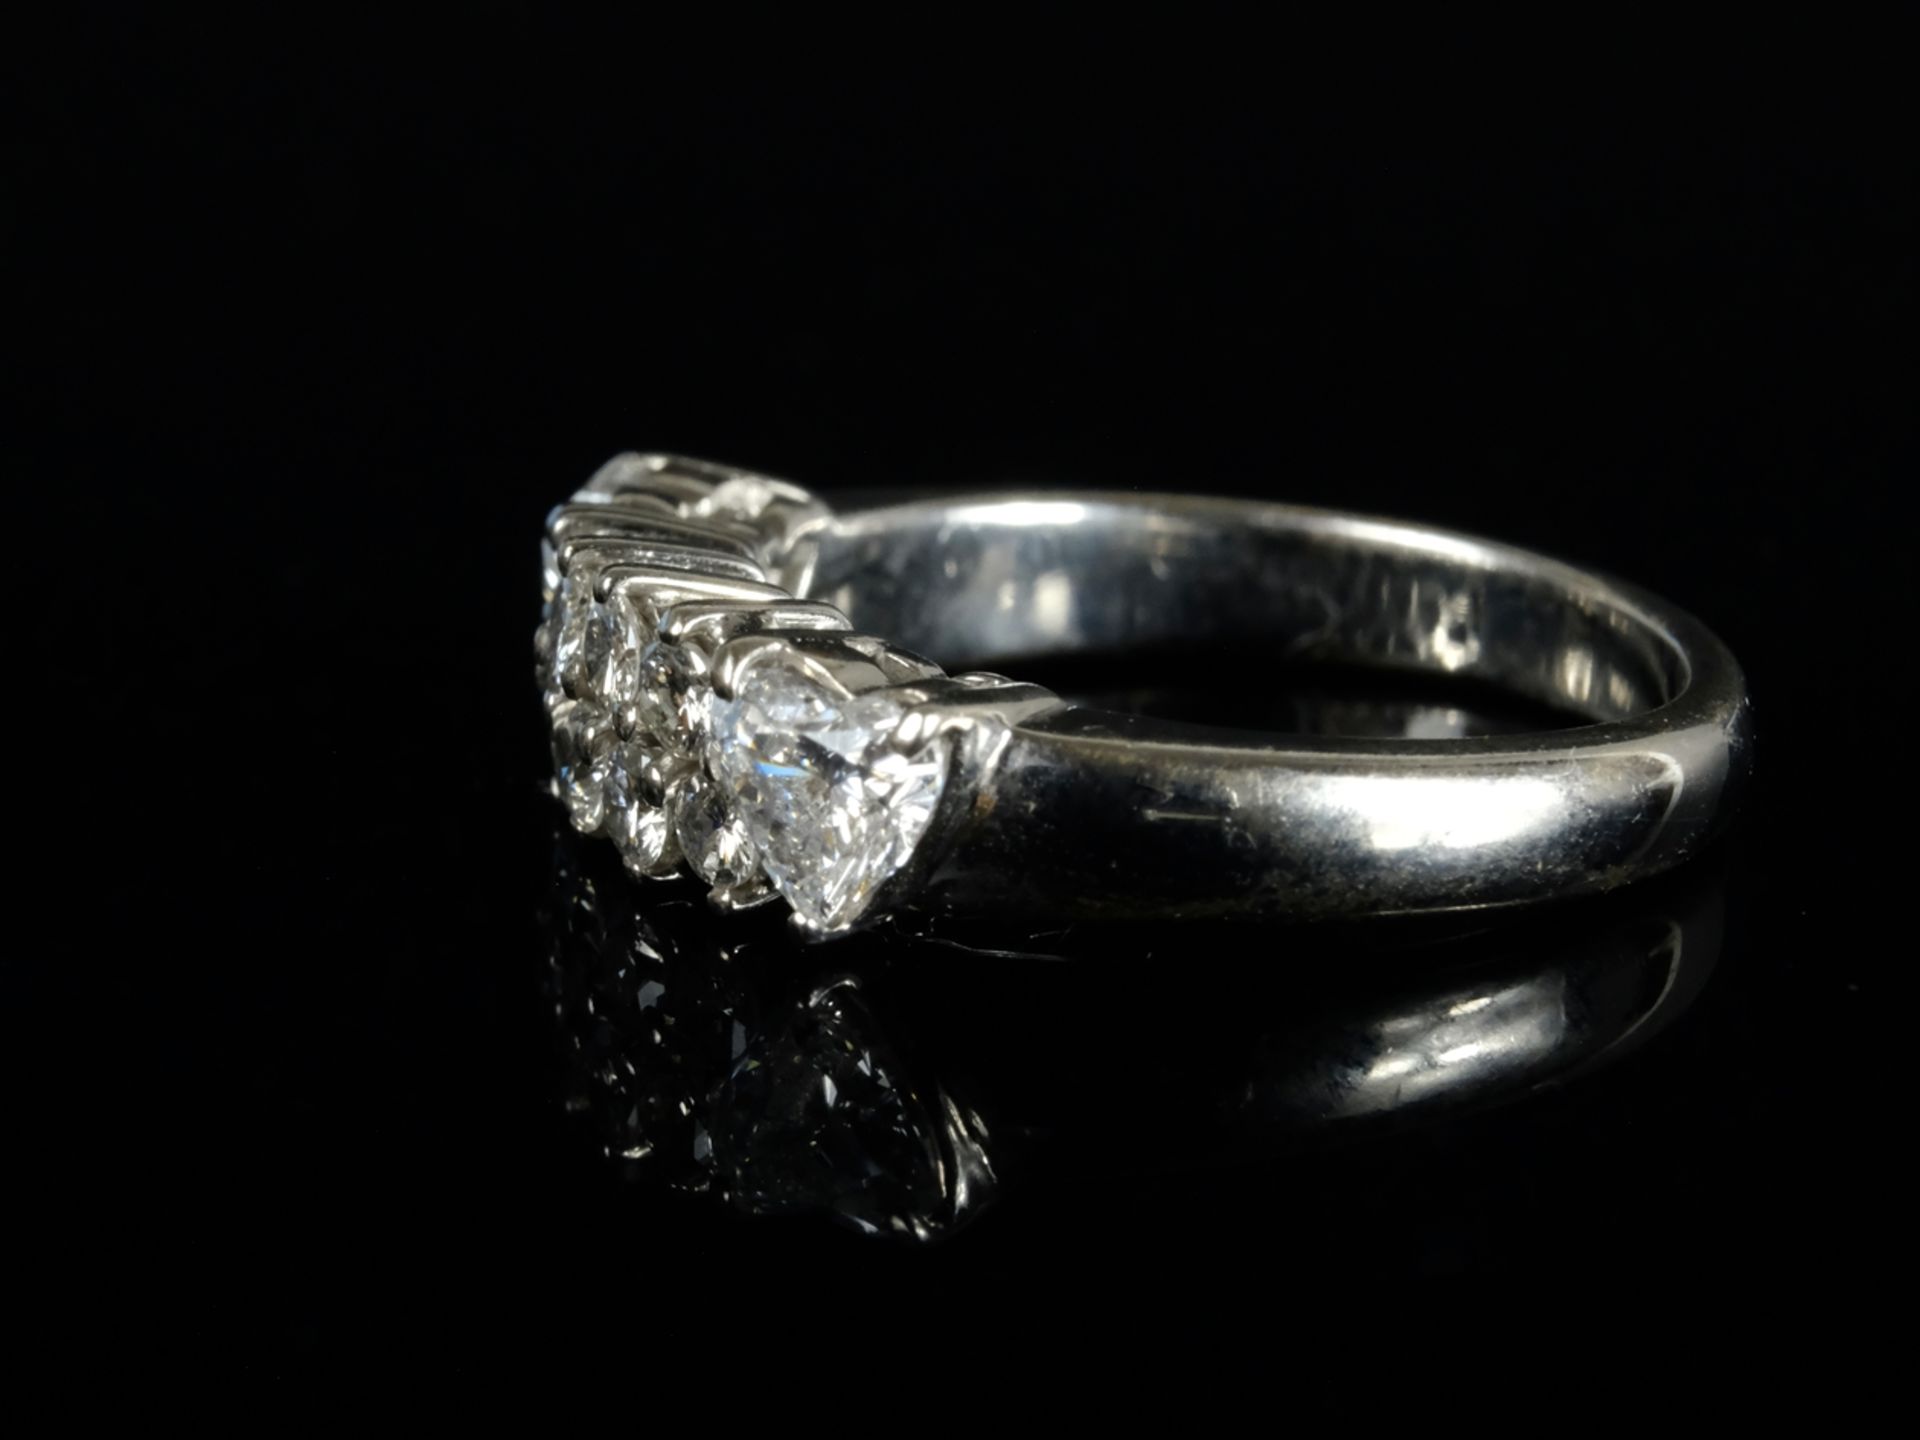 DOPPLE HEART RING set with ten brilliant-cut diamonds, flanked by two brilliant-cut diamonds in the - Image 3 of 4